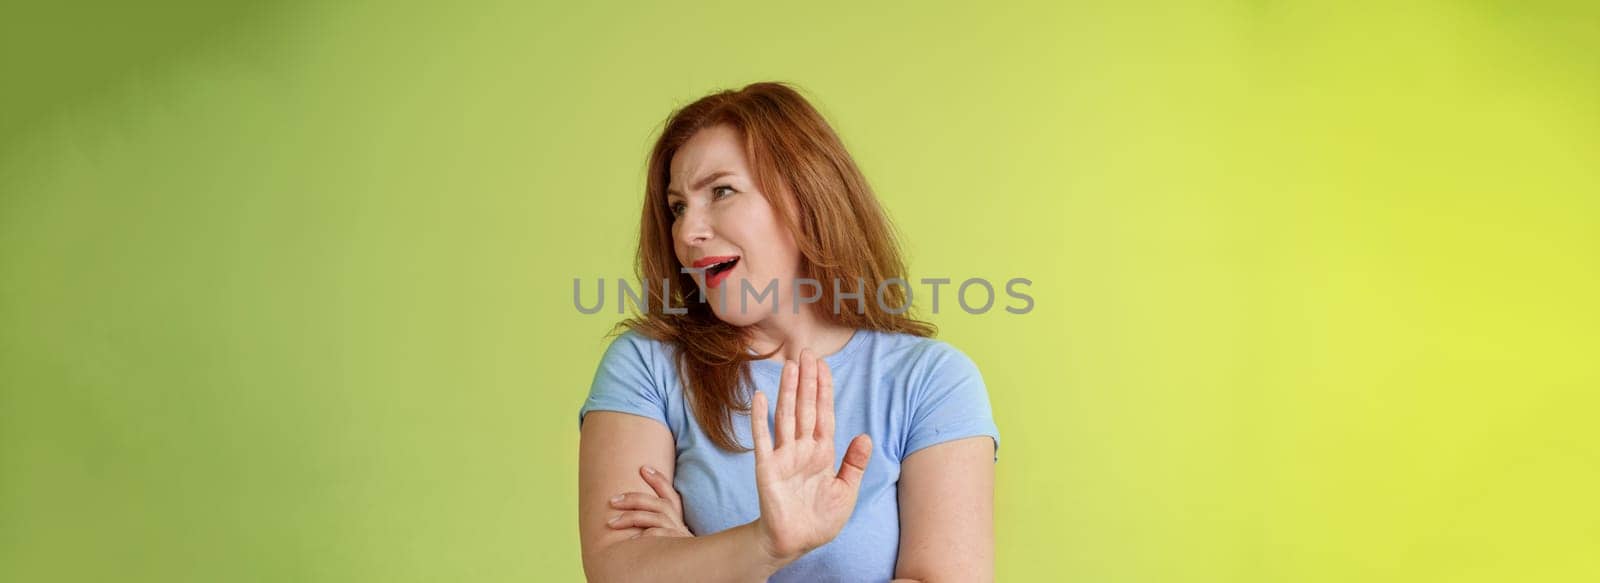 Enough wasting my time. Ignorant uninterested redhead mature woman turn away displeased reluctant show stop no gesture hold palm refusal rejecting unpleasant offer green background.